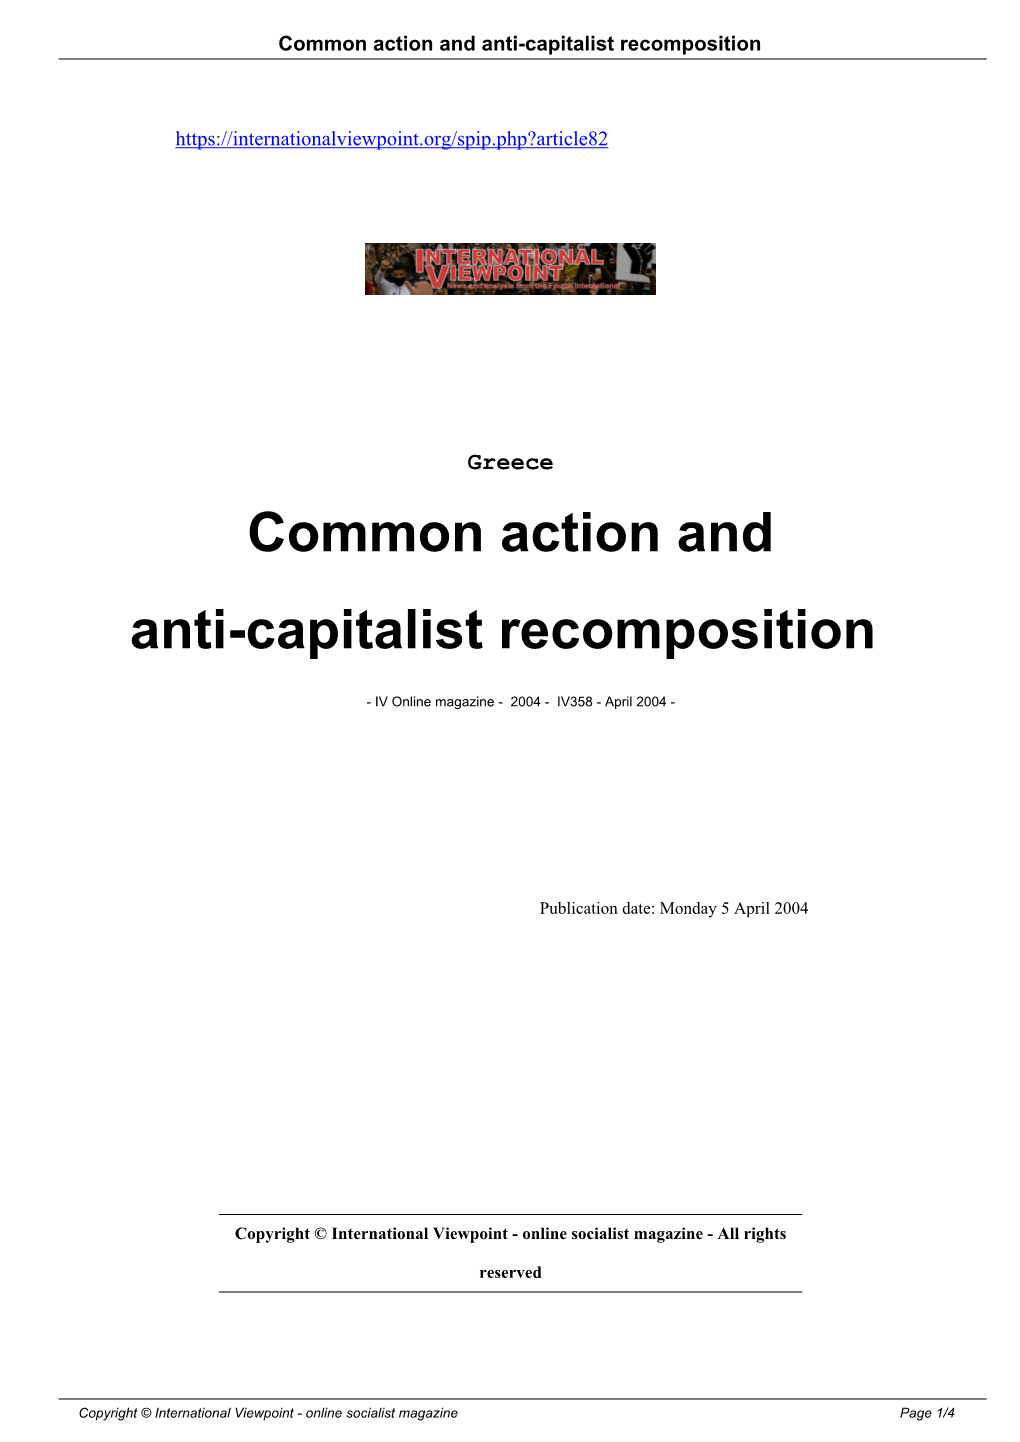 Common Action and Anti-Capitalist Recomposition